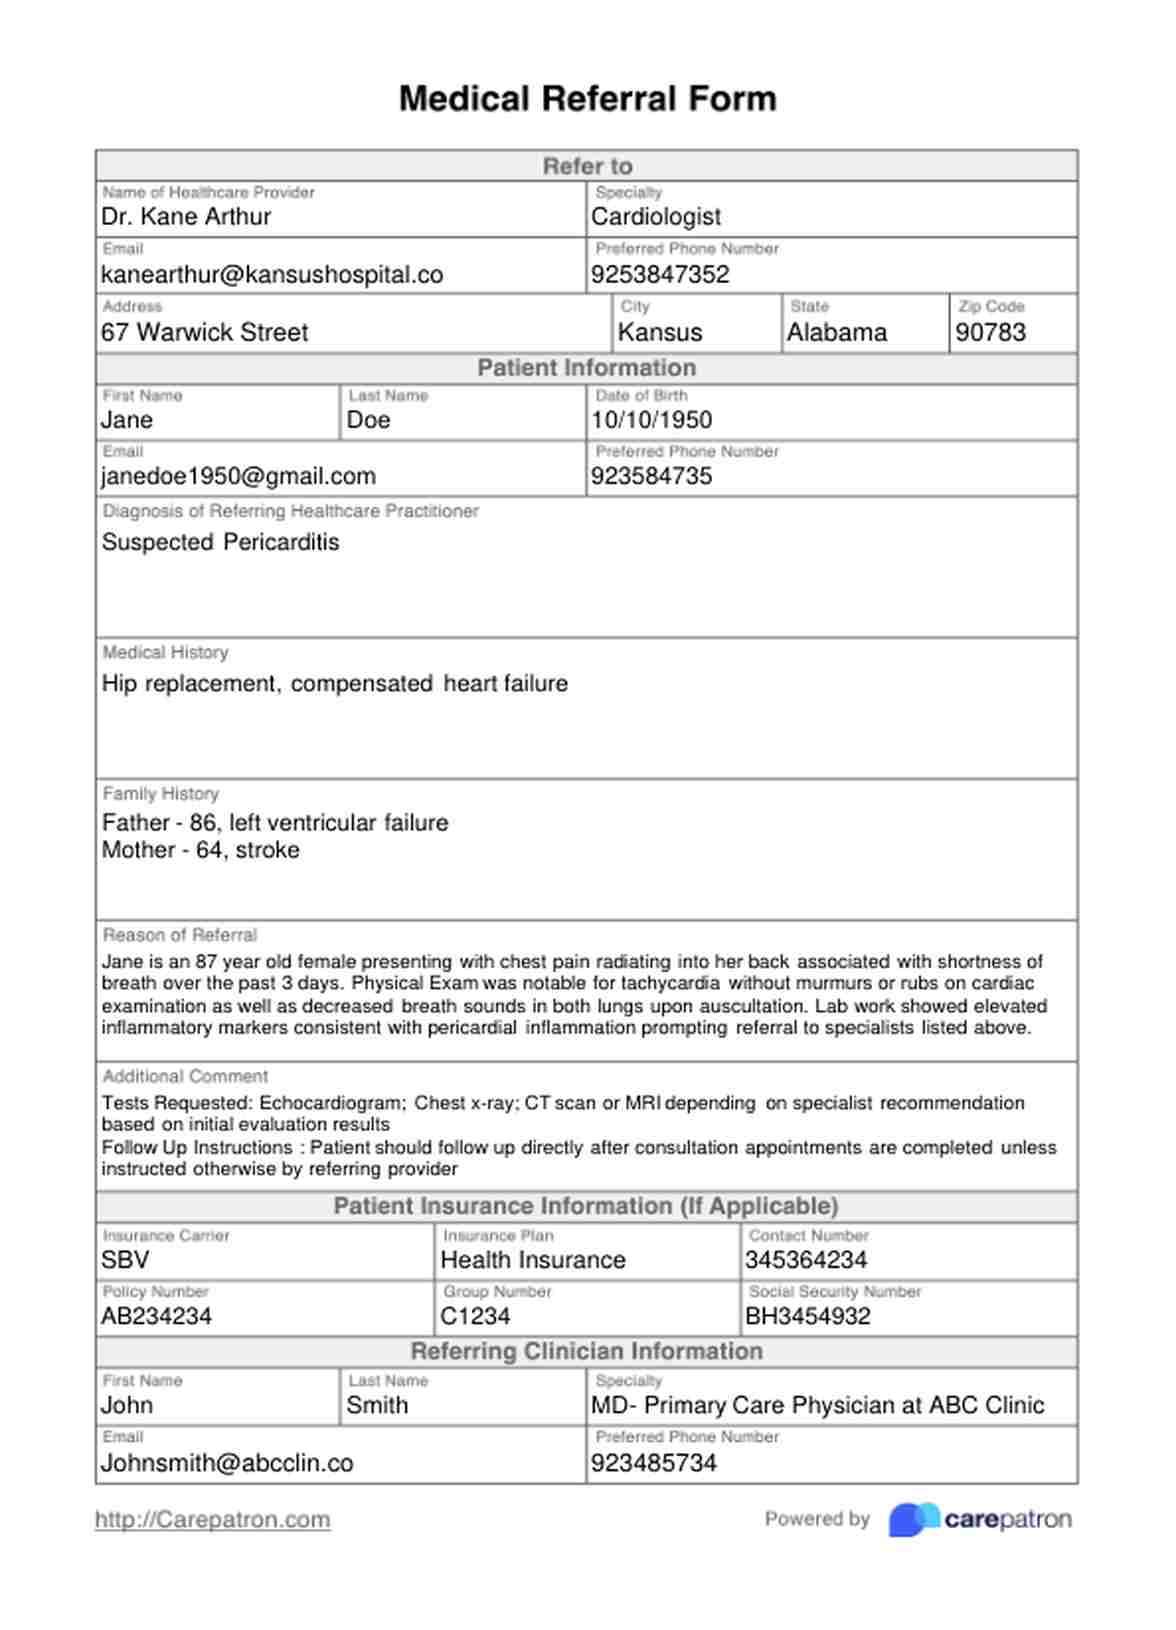 Medical Referral Form PDF Example